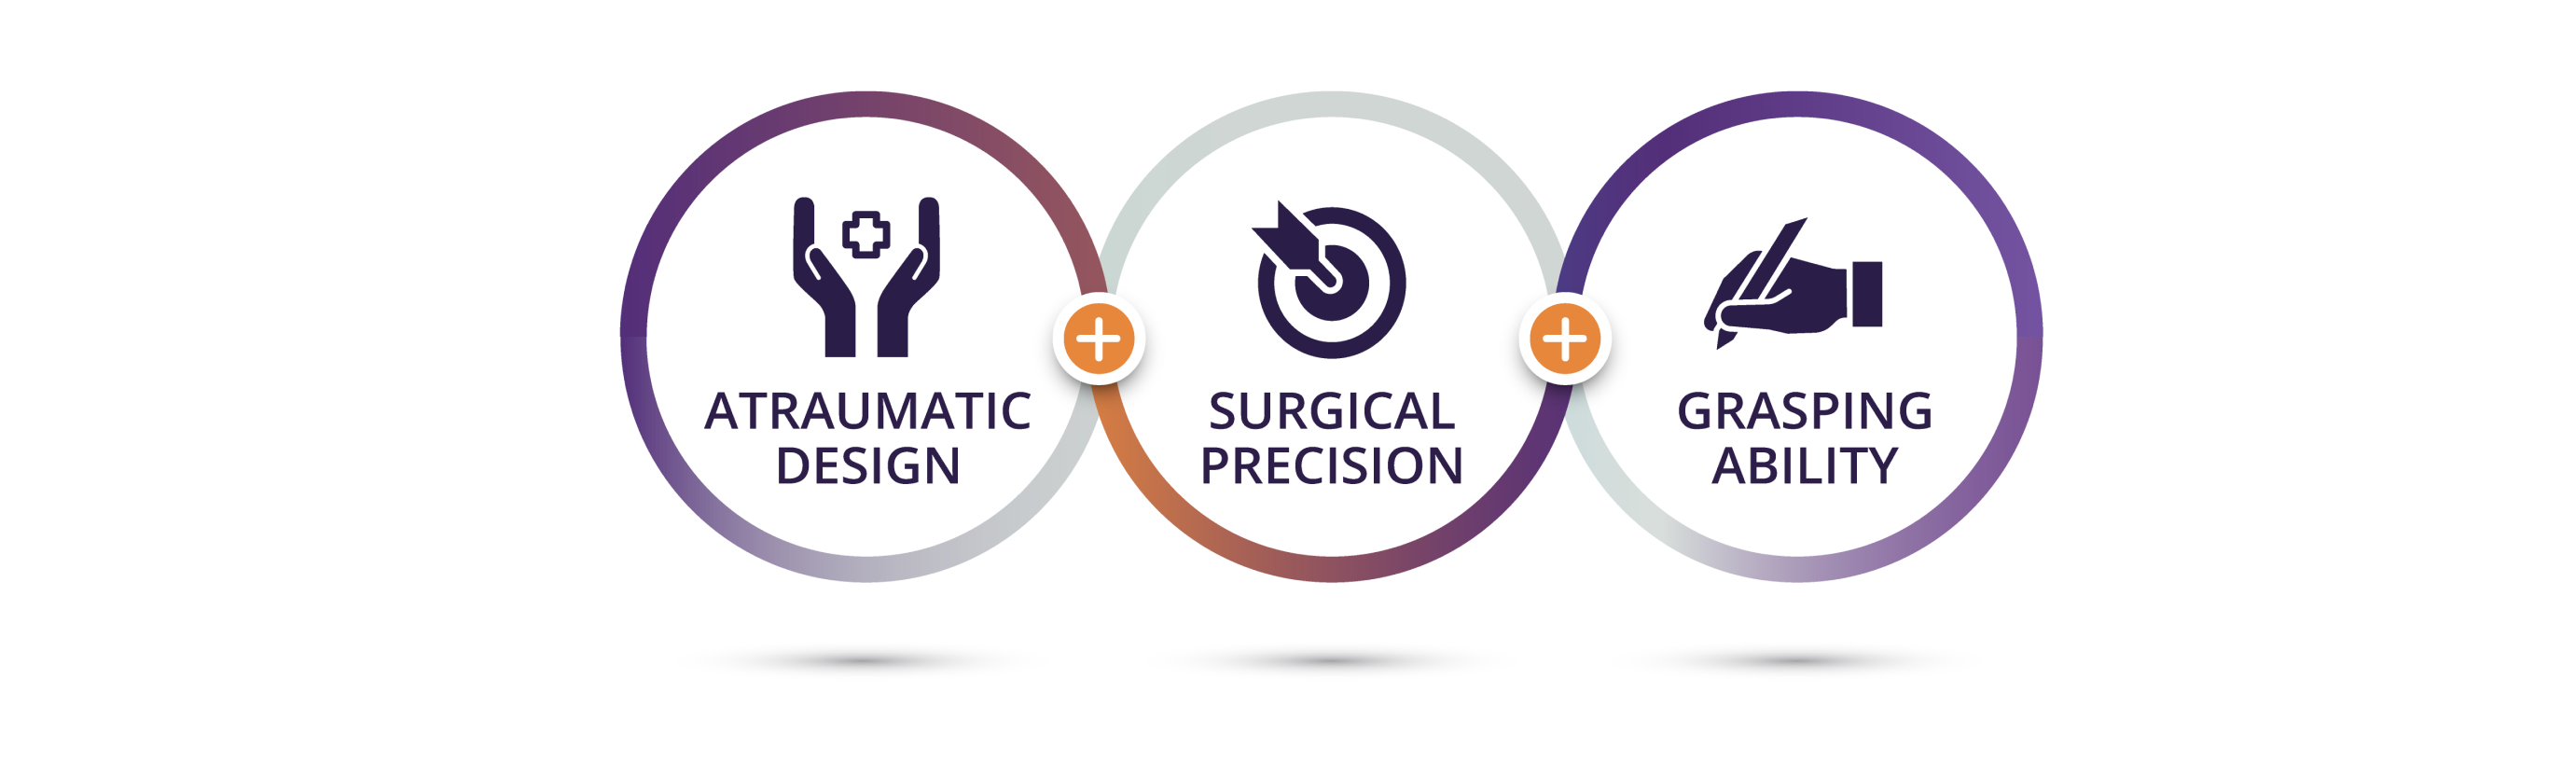 Three interlocking circles. Inside the first circle is a dark purple icon of open hands with a medical logo between the palms. Text underneath reads “atraumatic design.” Inside the second circle is a dark purple icon of a bullseye with an arrow in the middle. Text underneath reads “surgical precision.” Inside the last circle is a dark purple icon of a hand holding a pen in a writing position. Text underneath reads “grasping ability.”